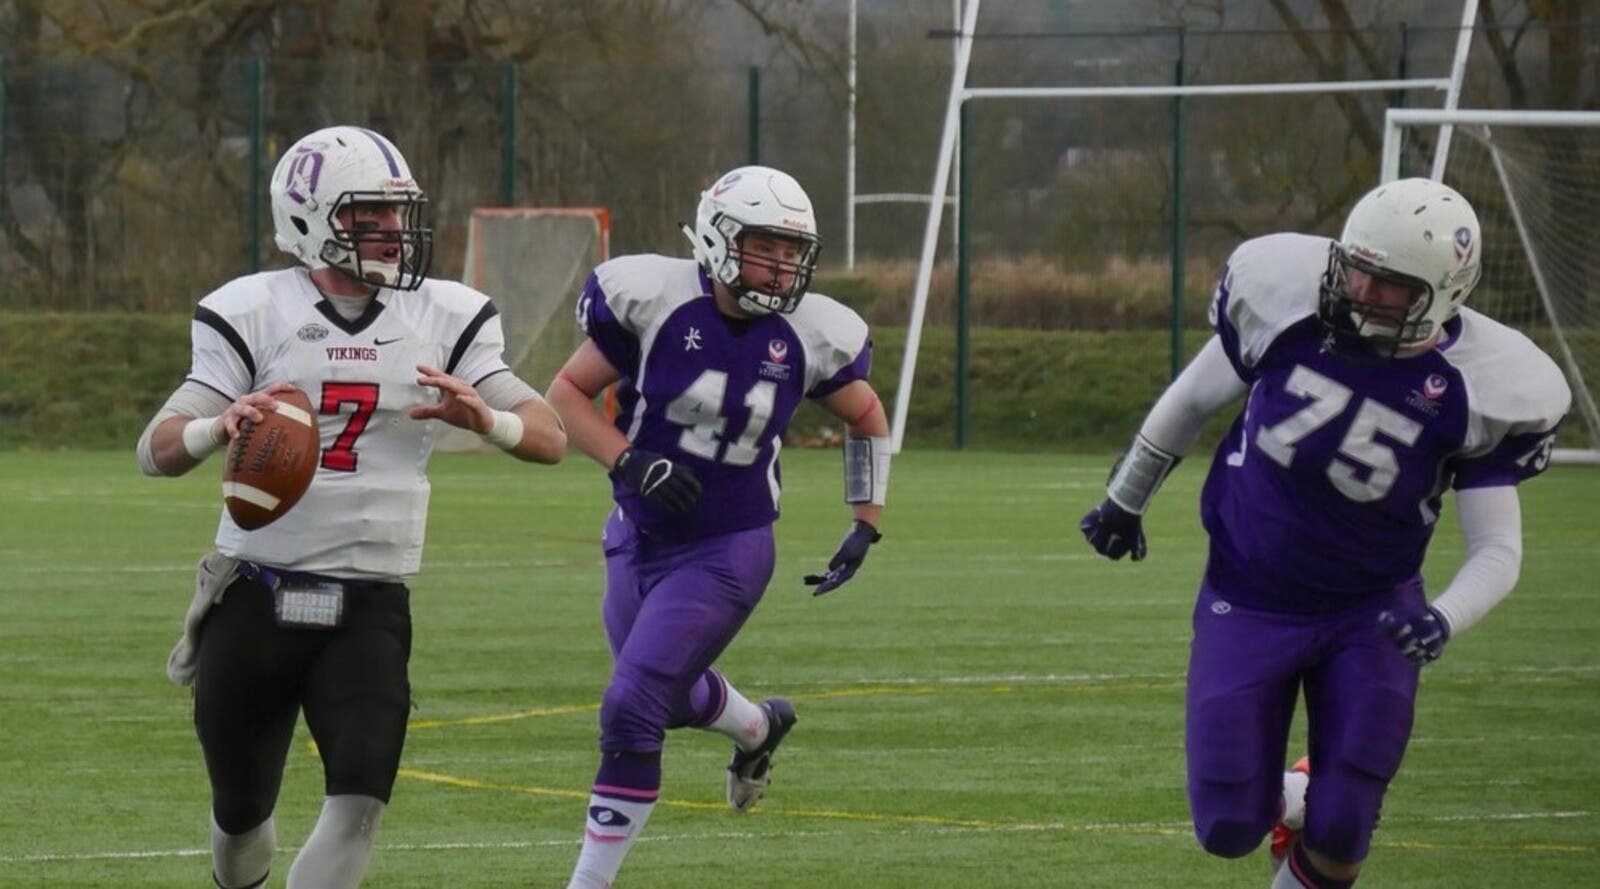 Students playing American football.